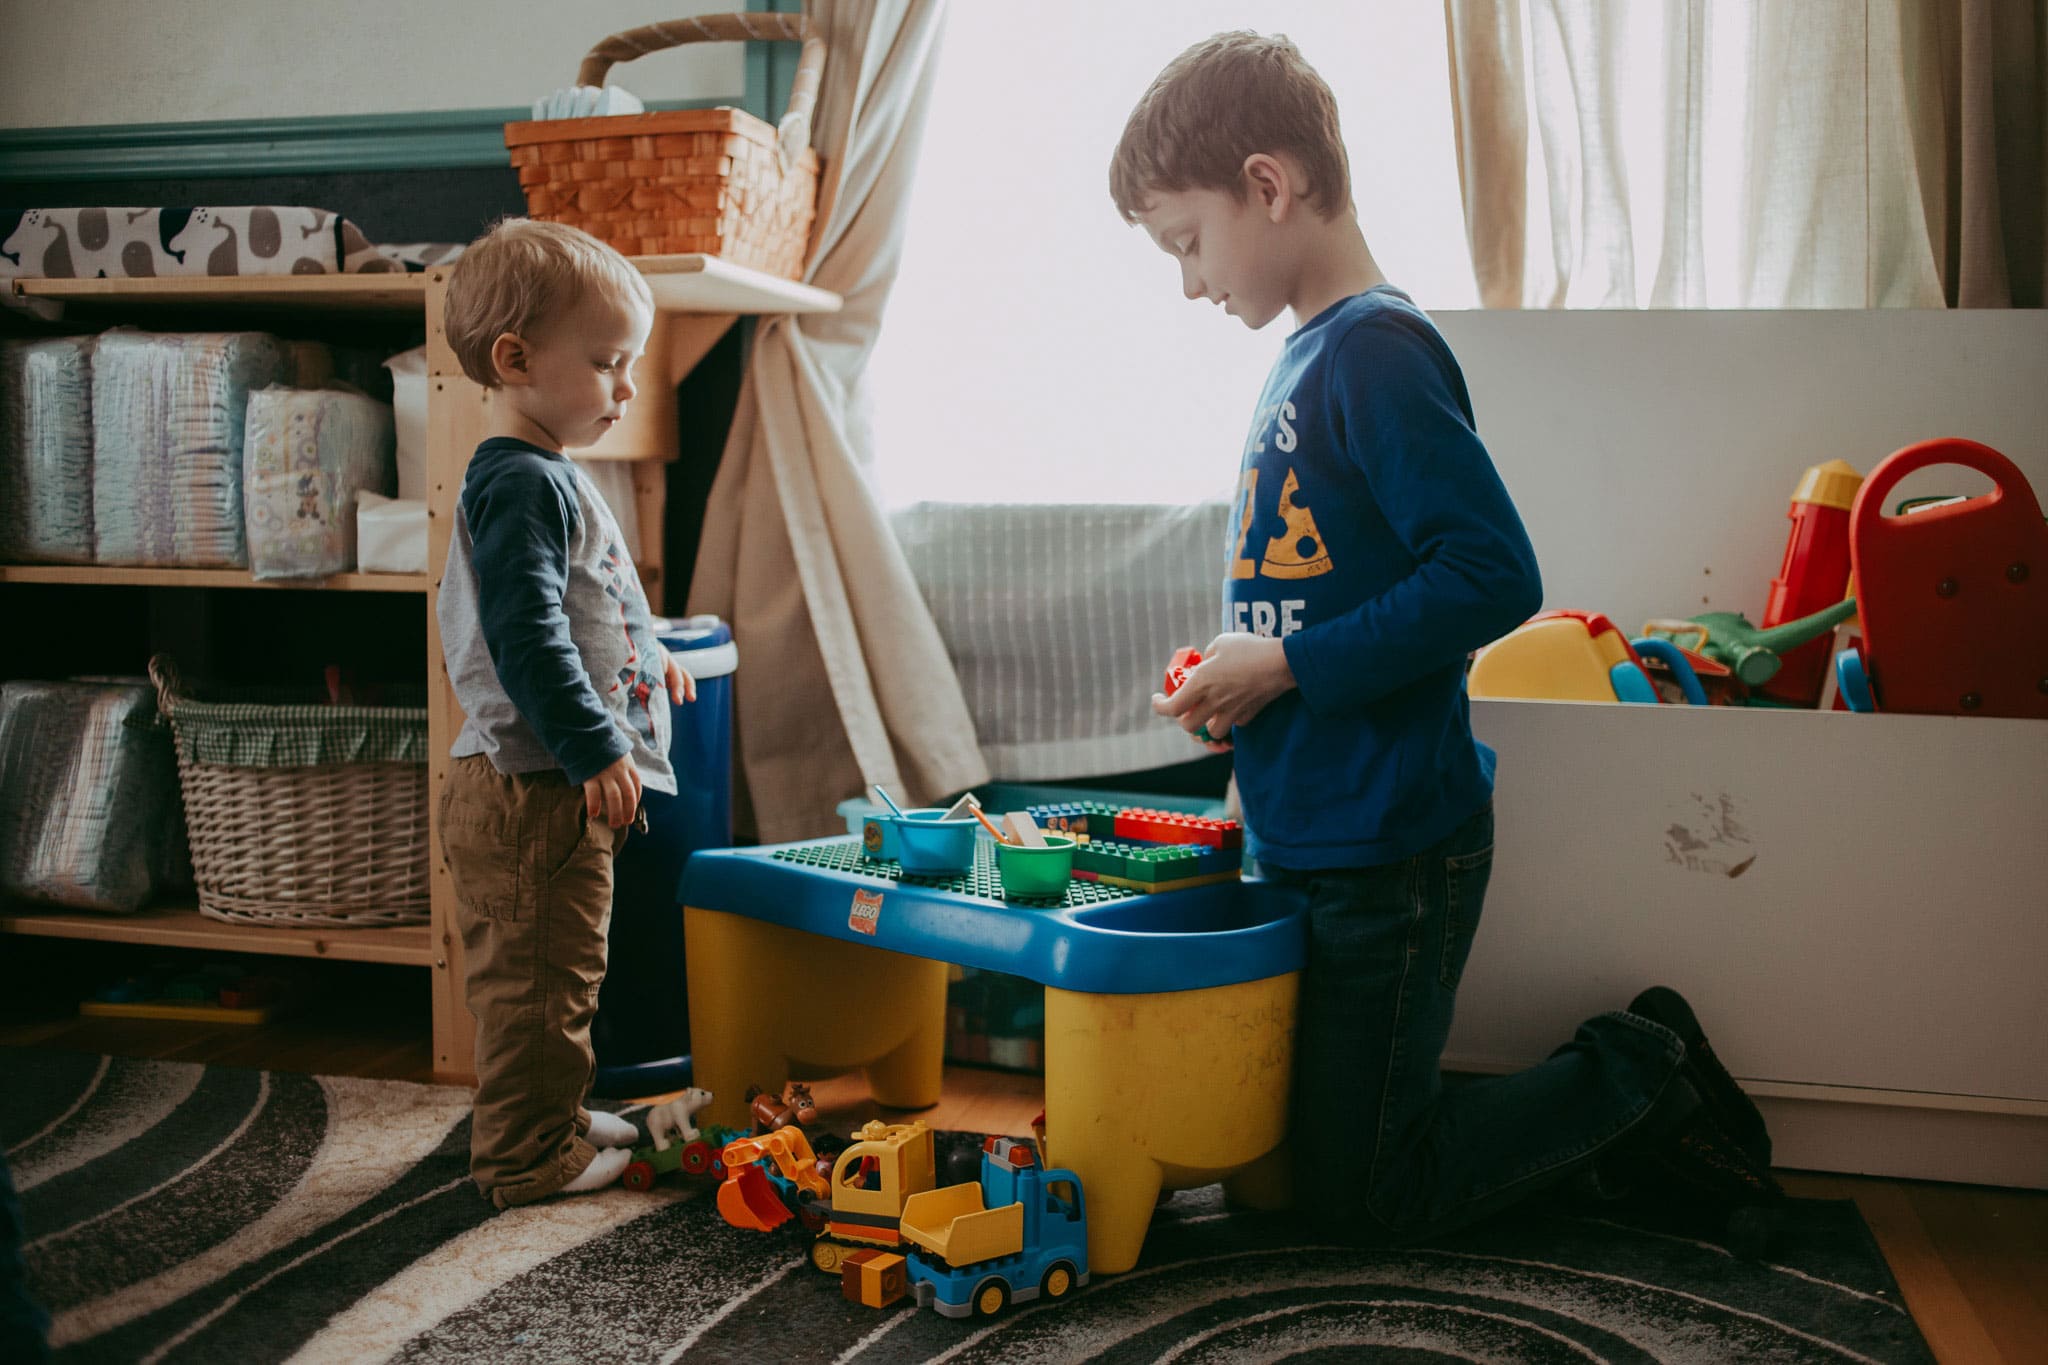 Boys playing together - Portland Lifestyle Family Photography